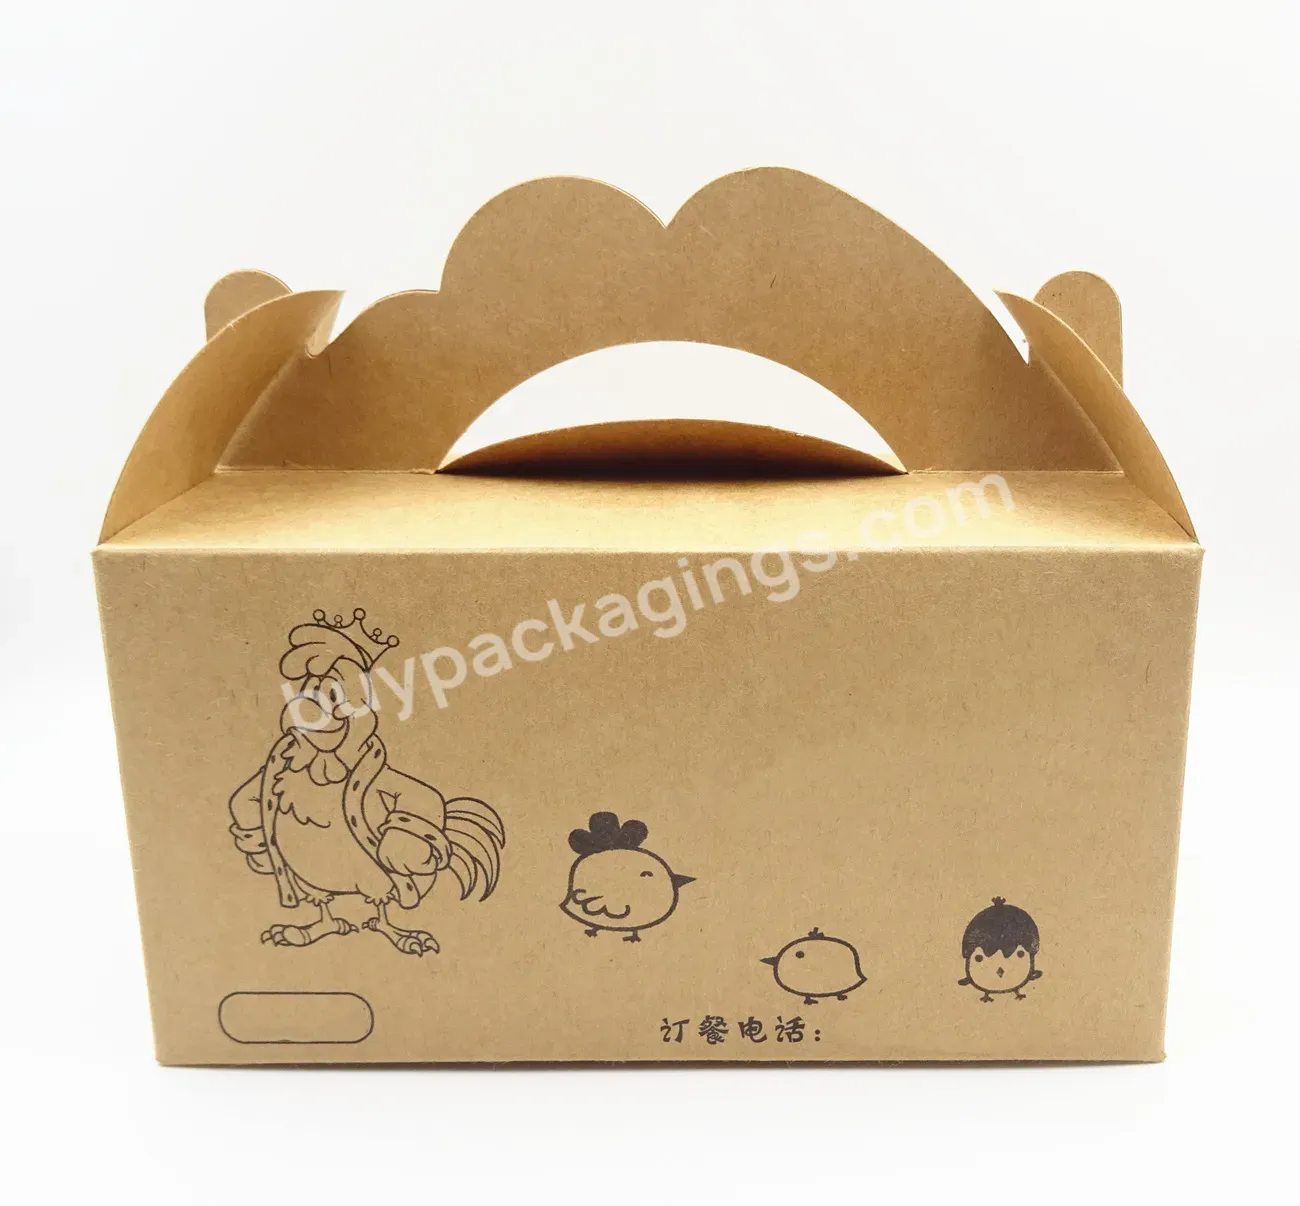 Fried Chicken Boxes Out Container Fried Chicken Fast Food Paper Boxes - Buy Out Container Fried Chicken Fast Food Paper Boxes,Fried Chicken Boxes,Packaging French Fried Chicken Box.